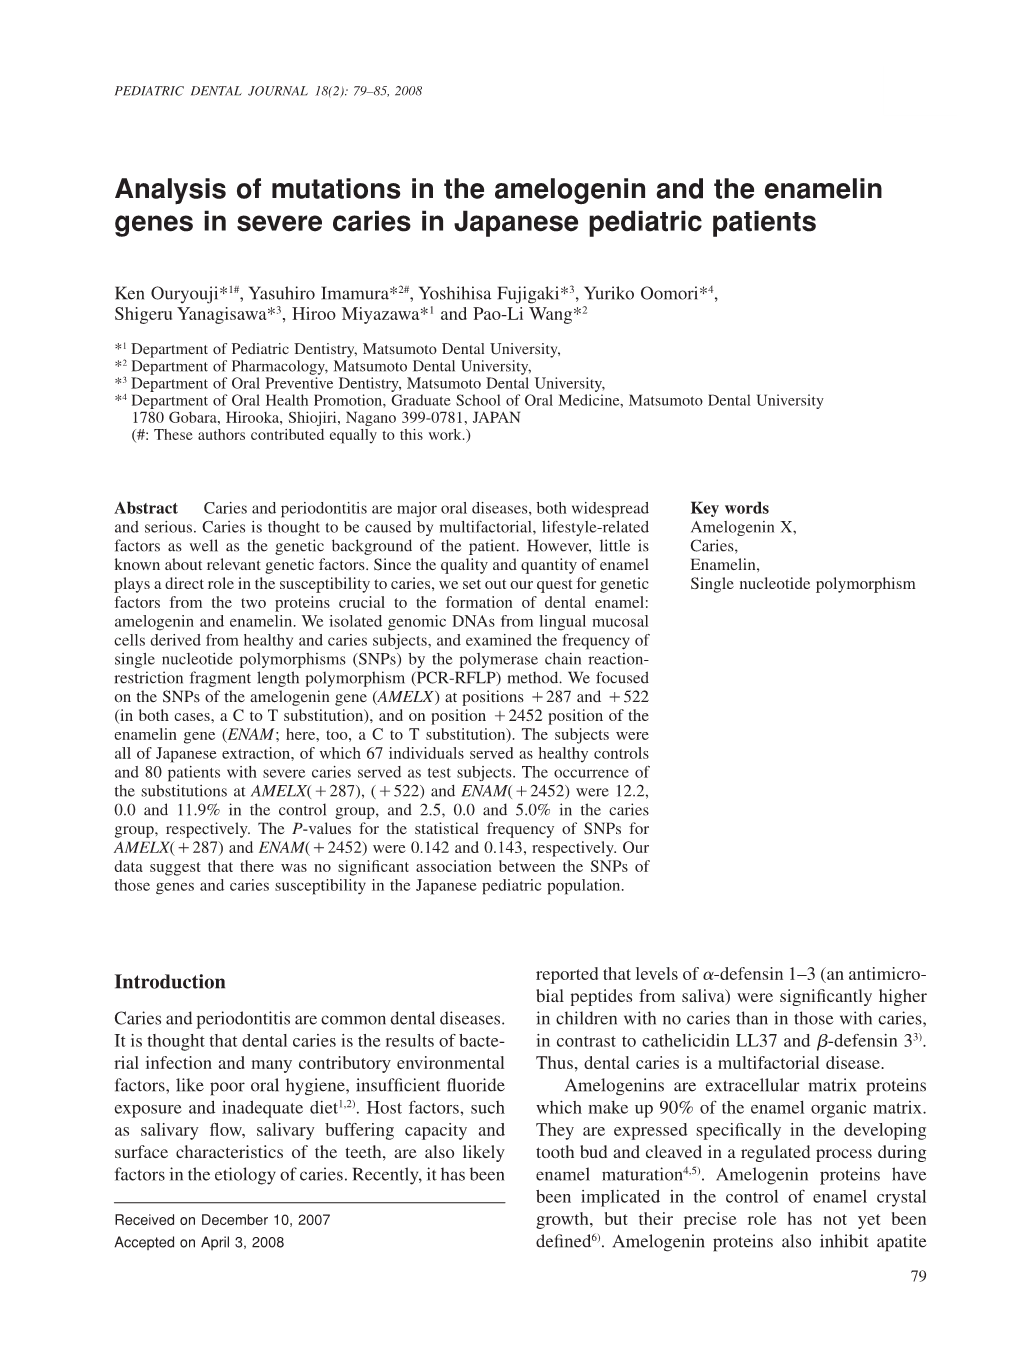 Analysis of Mutations in the Amelogenin and the Enamelin Genes in Severe Caries in Japanese Pediatric Patients